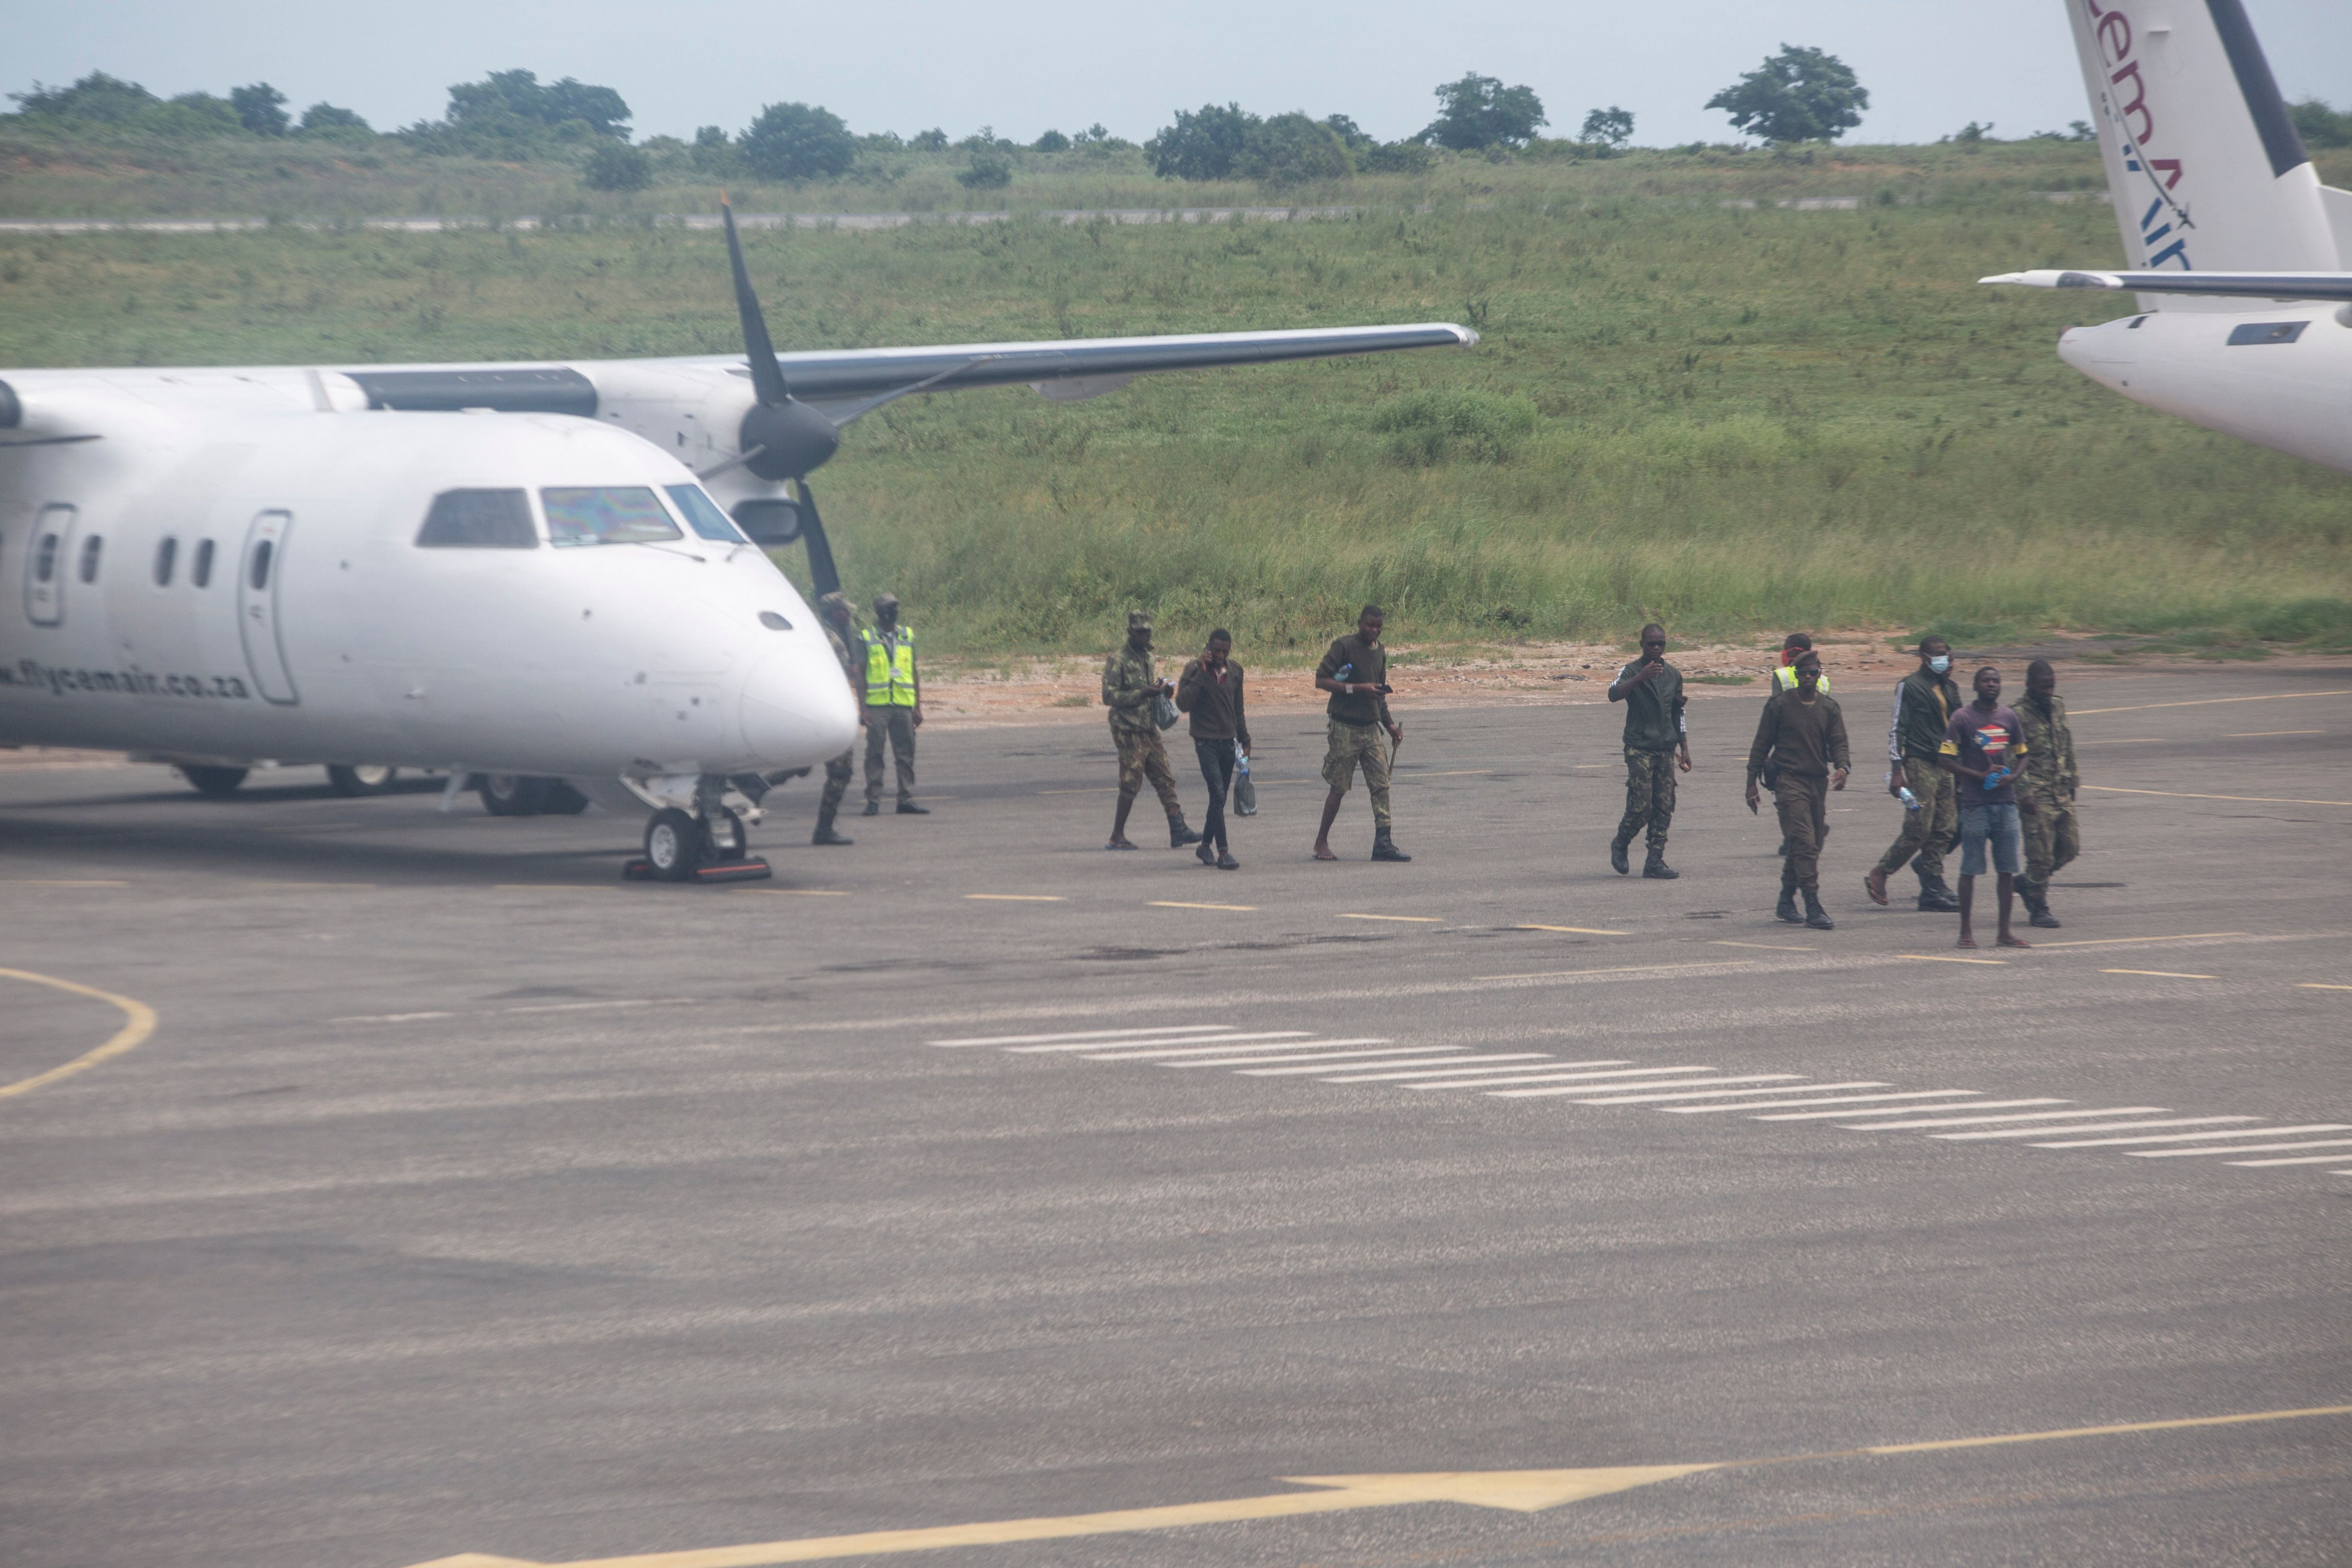 Mozambican soldiers are seen leaving a plane parked on the tarmac of the airport in Pemba on 31 March